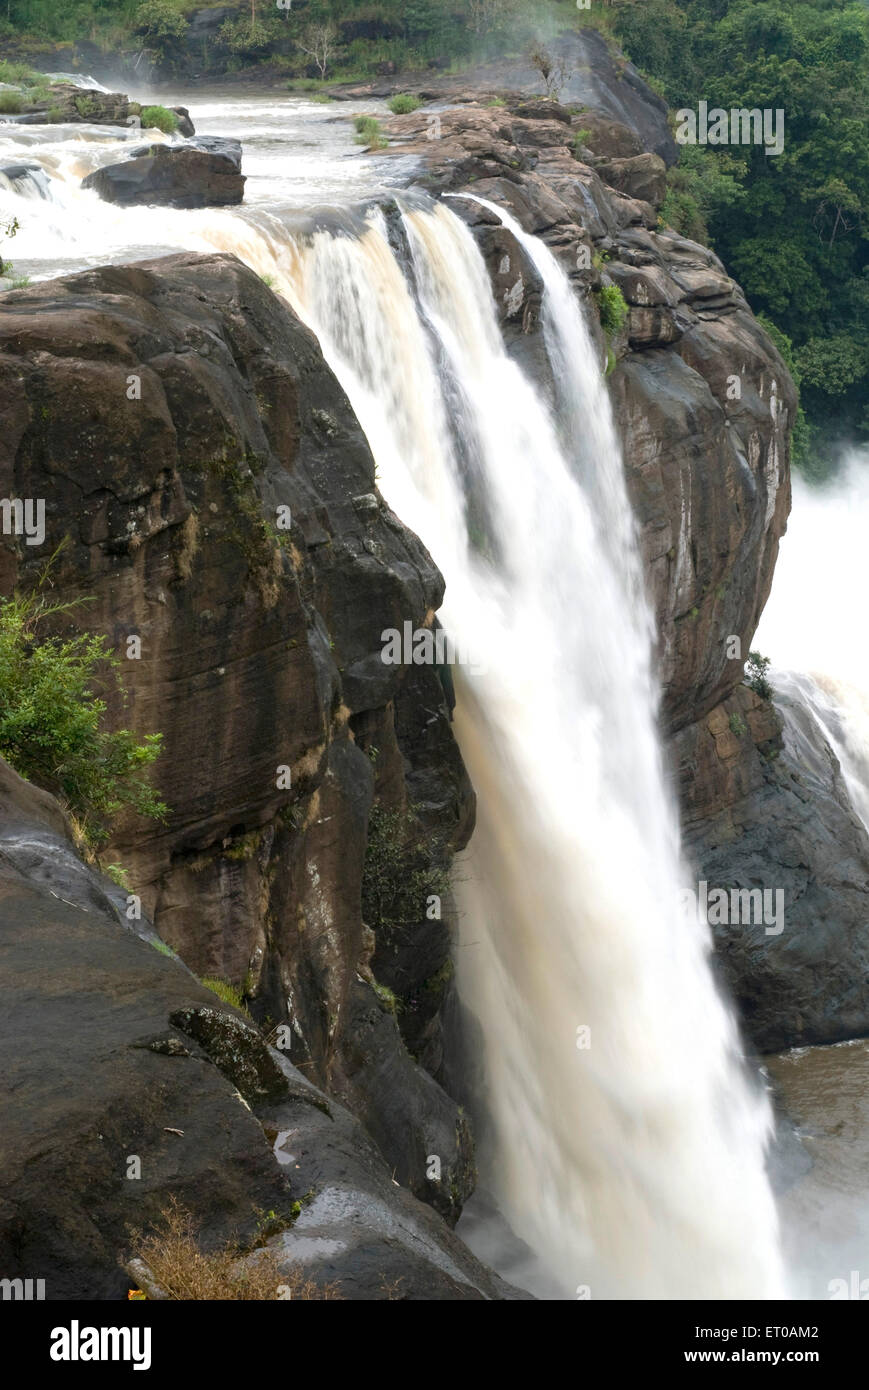 Cascate di Athirappally, le cascate di Athirappilly, Chalakudy River, Chalakkudy, Chalakudy Taluk, Thrissur District, Kerala, India, Asia Foto Stock